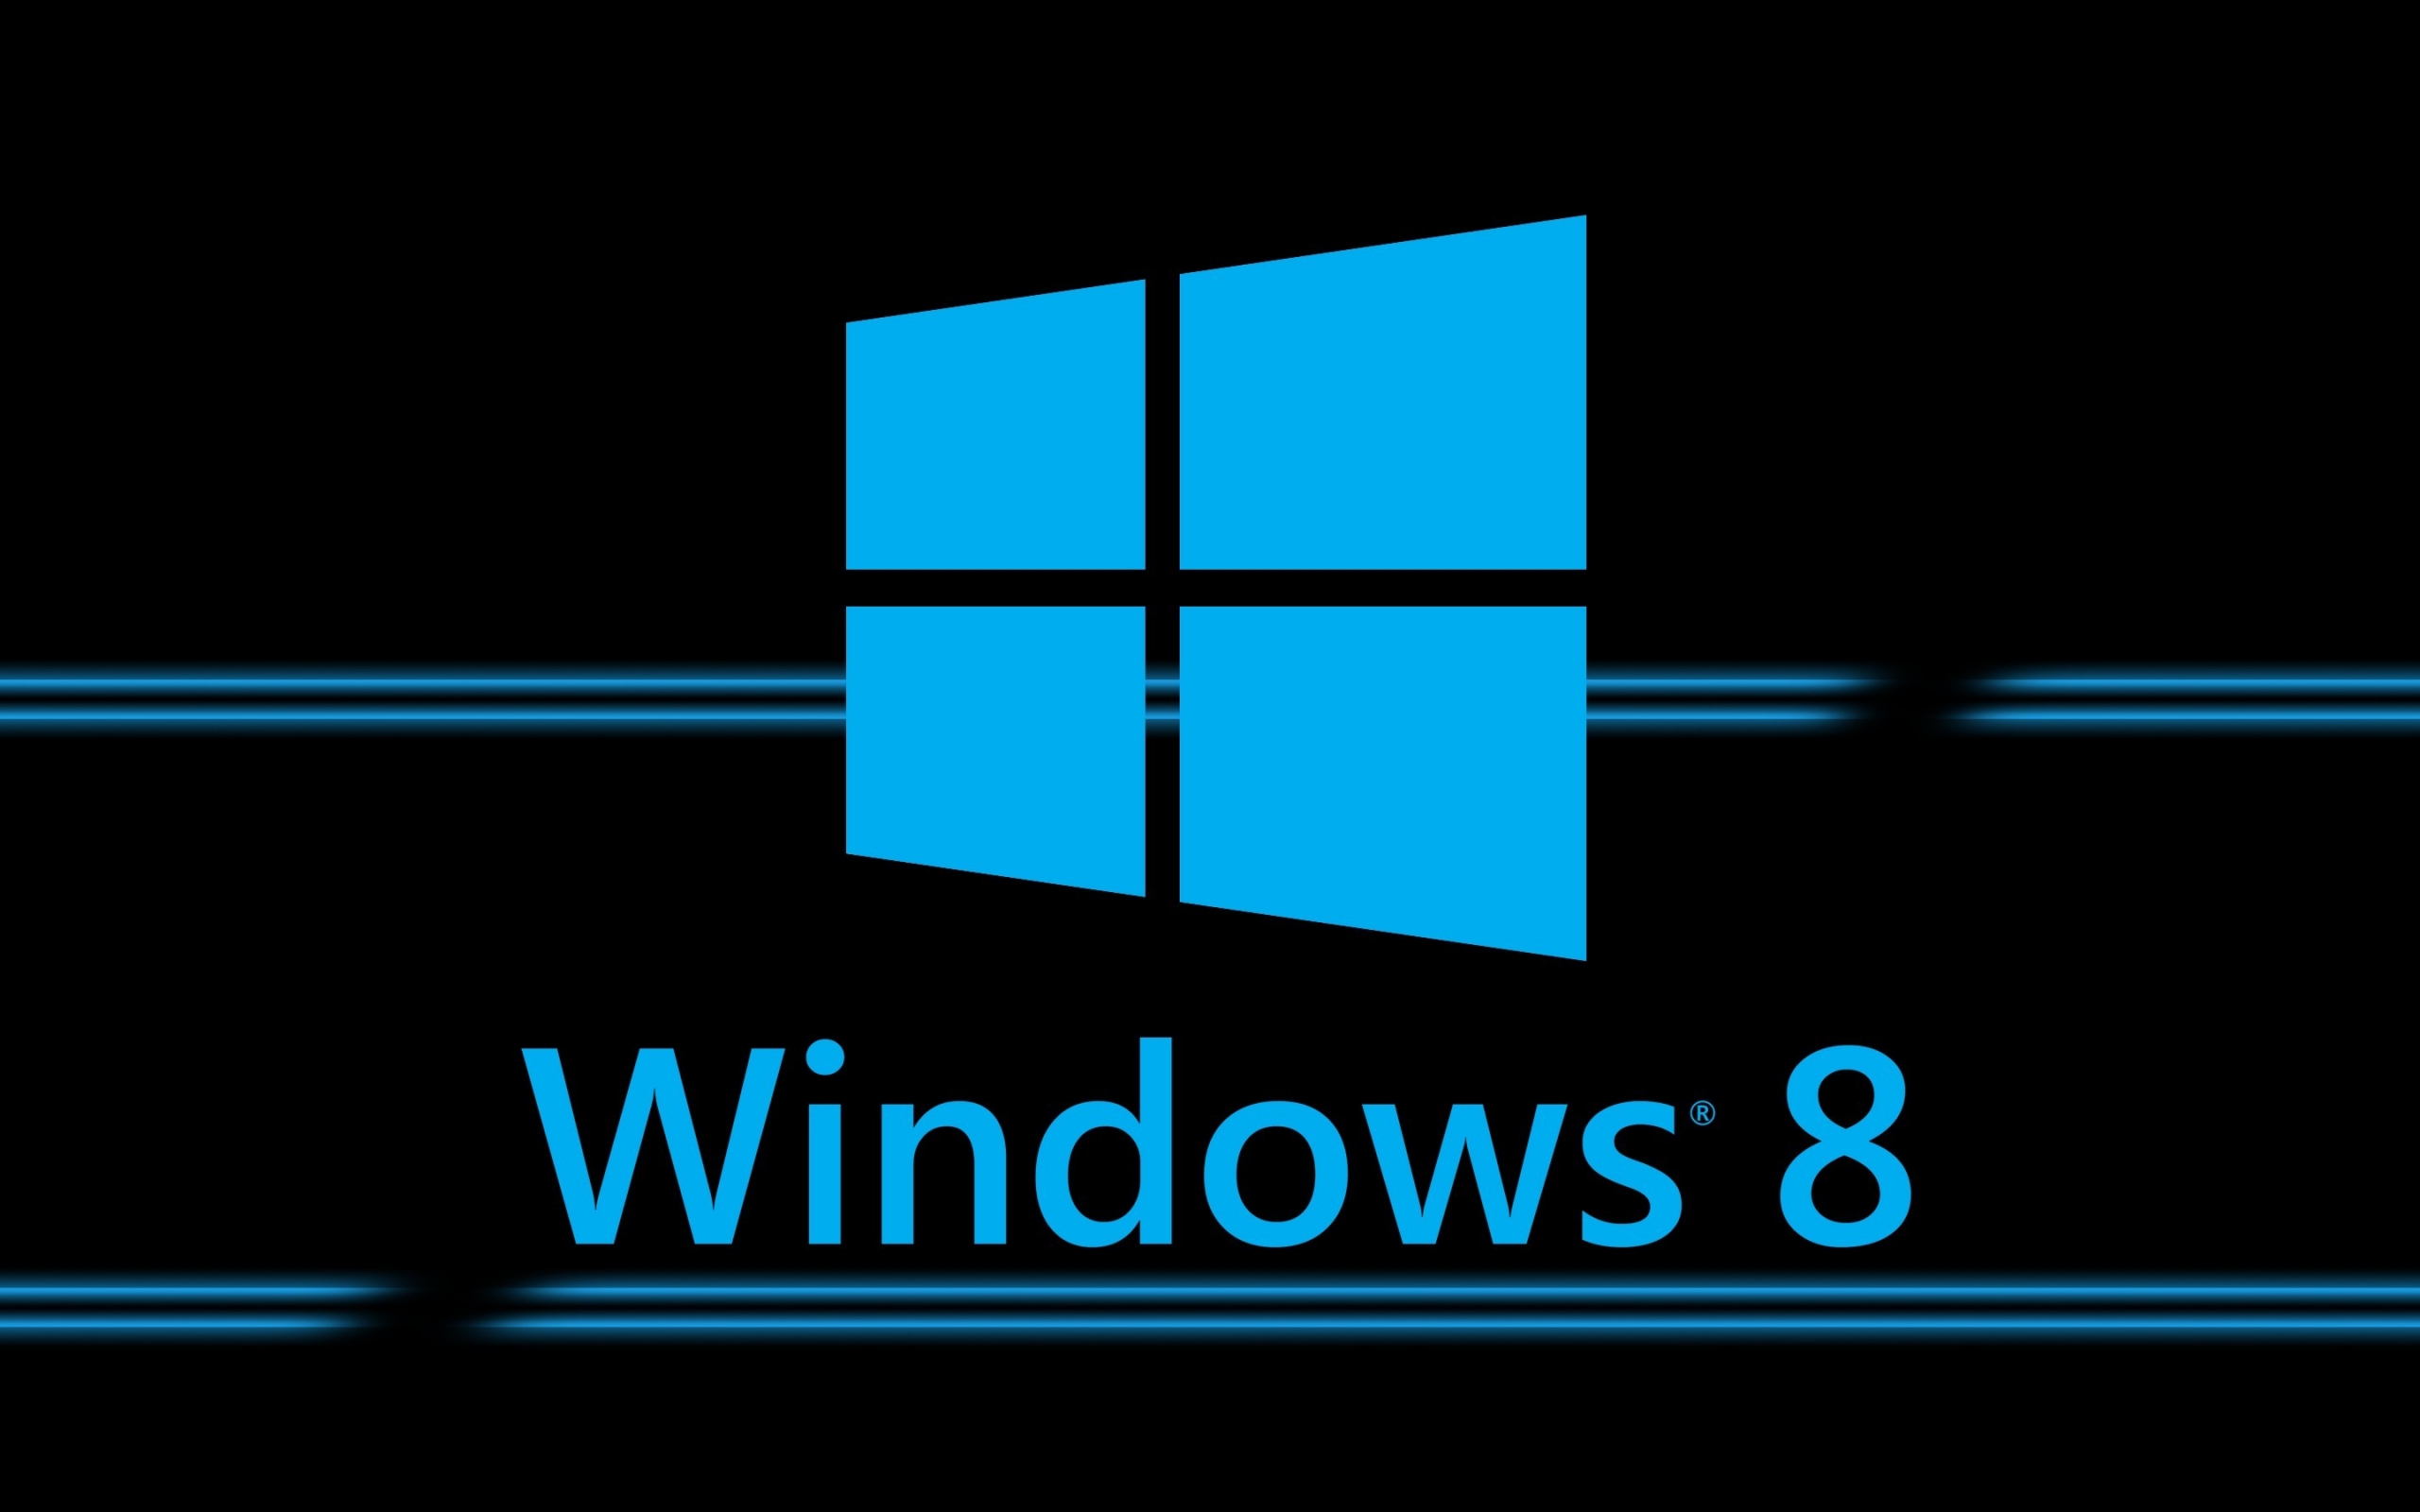 Windows 8 New for 2560 x 1600 widescreen resolution